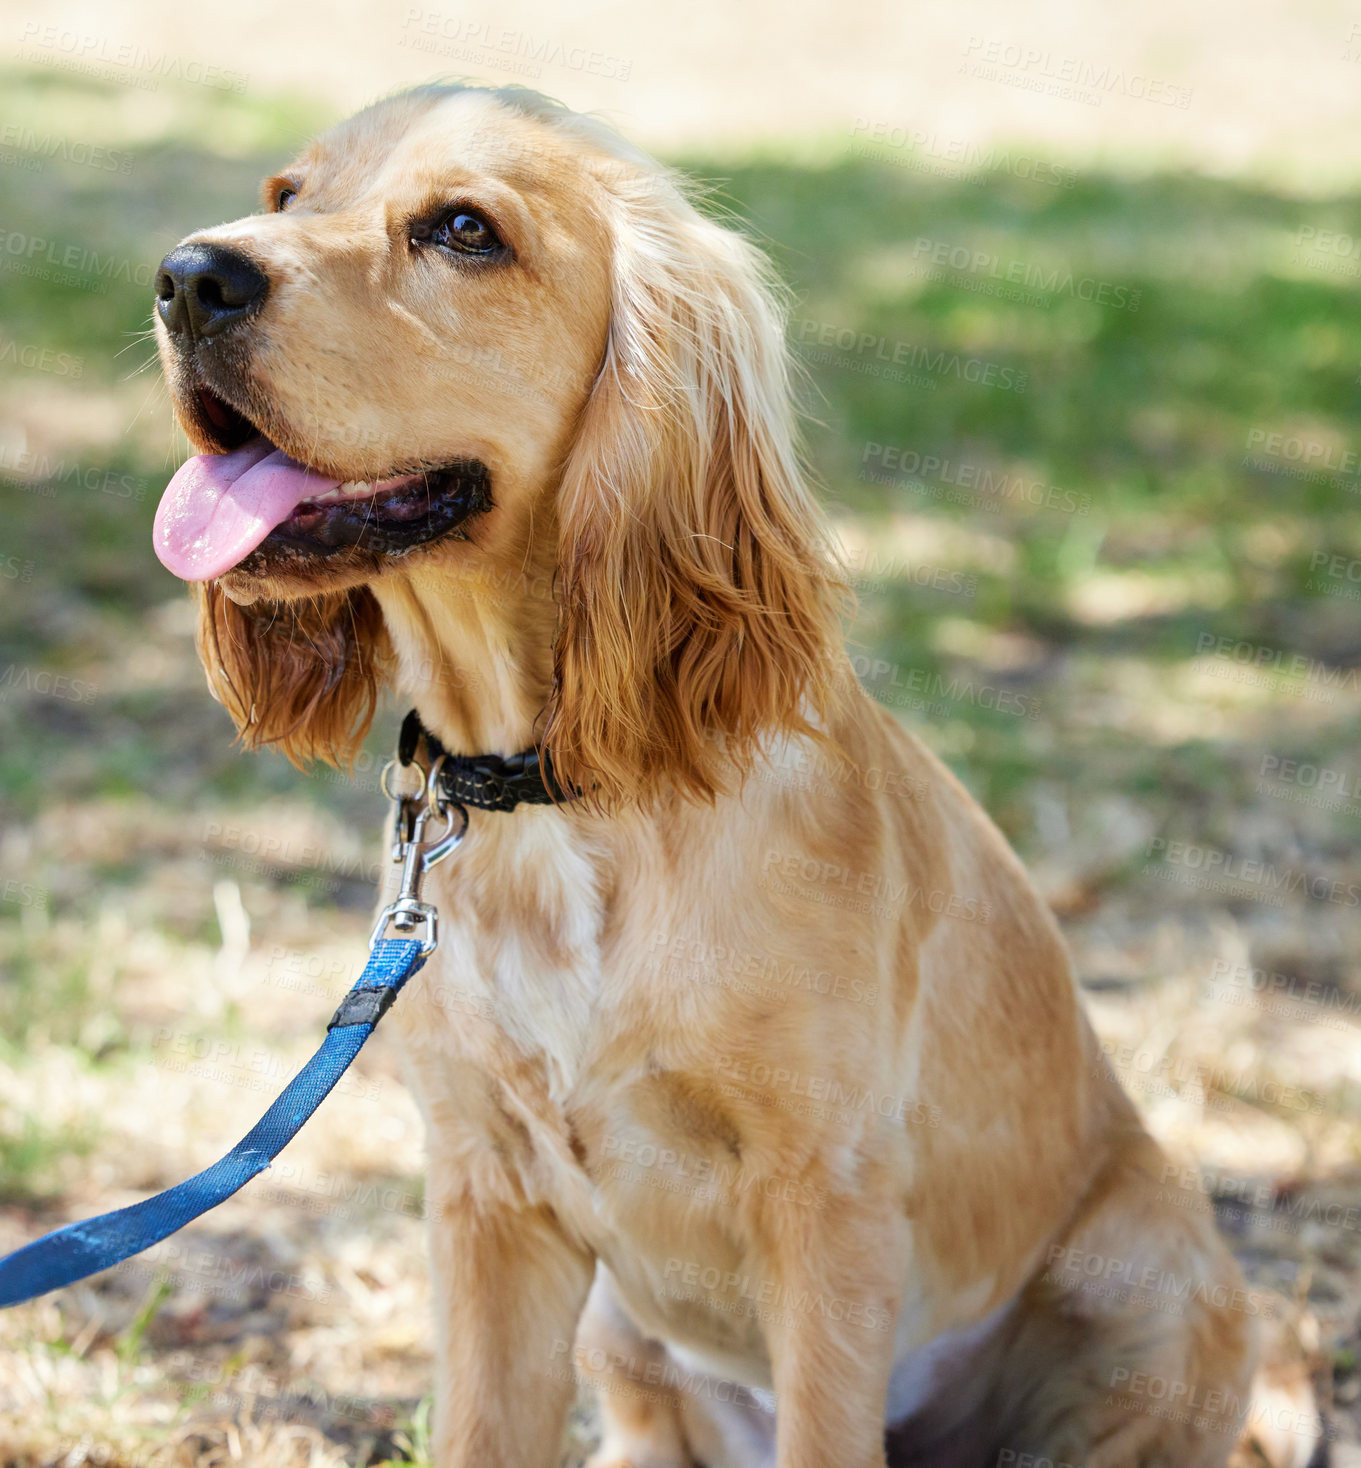 Buy stock photo Shot of an adorable cocker spaniel puppy sitting outside on the grass getting ready to go for a walk